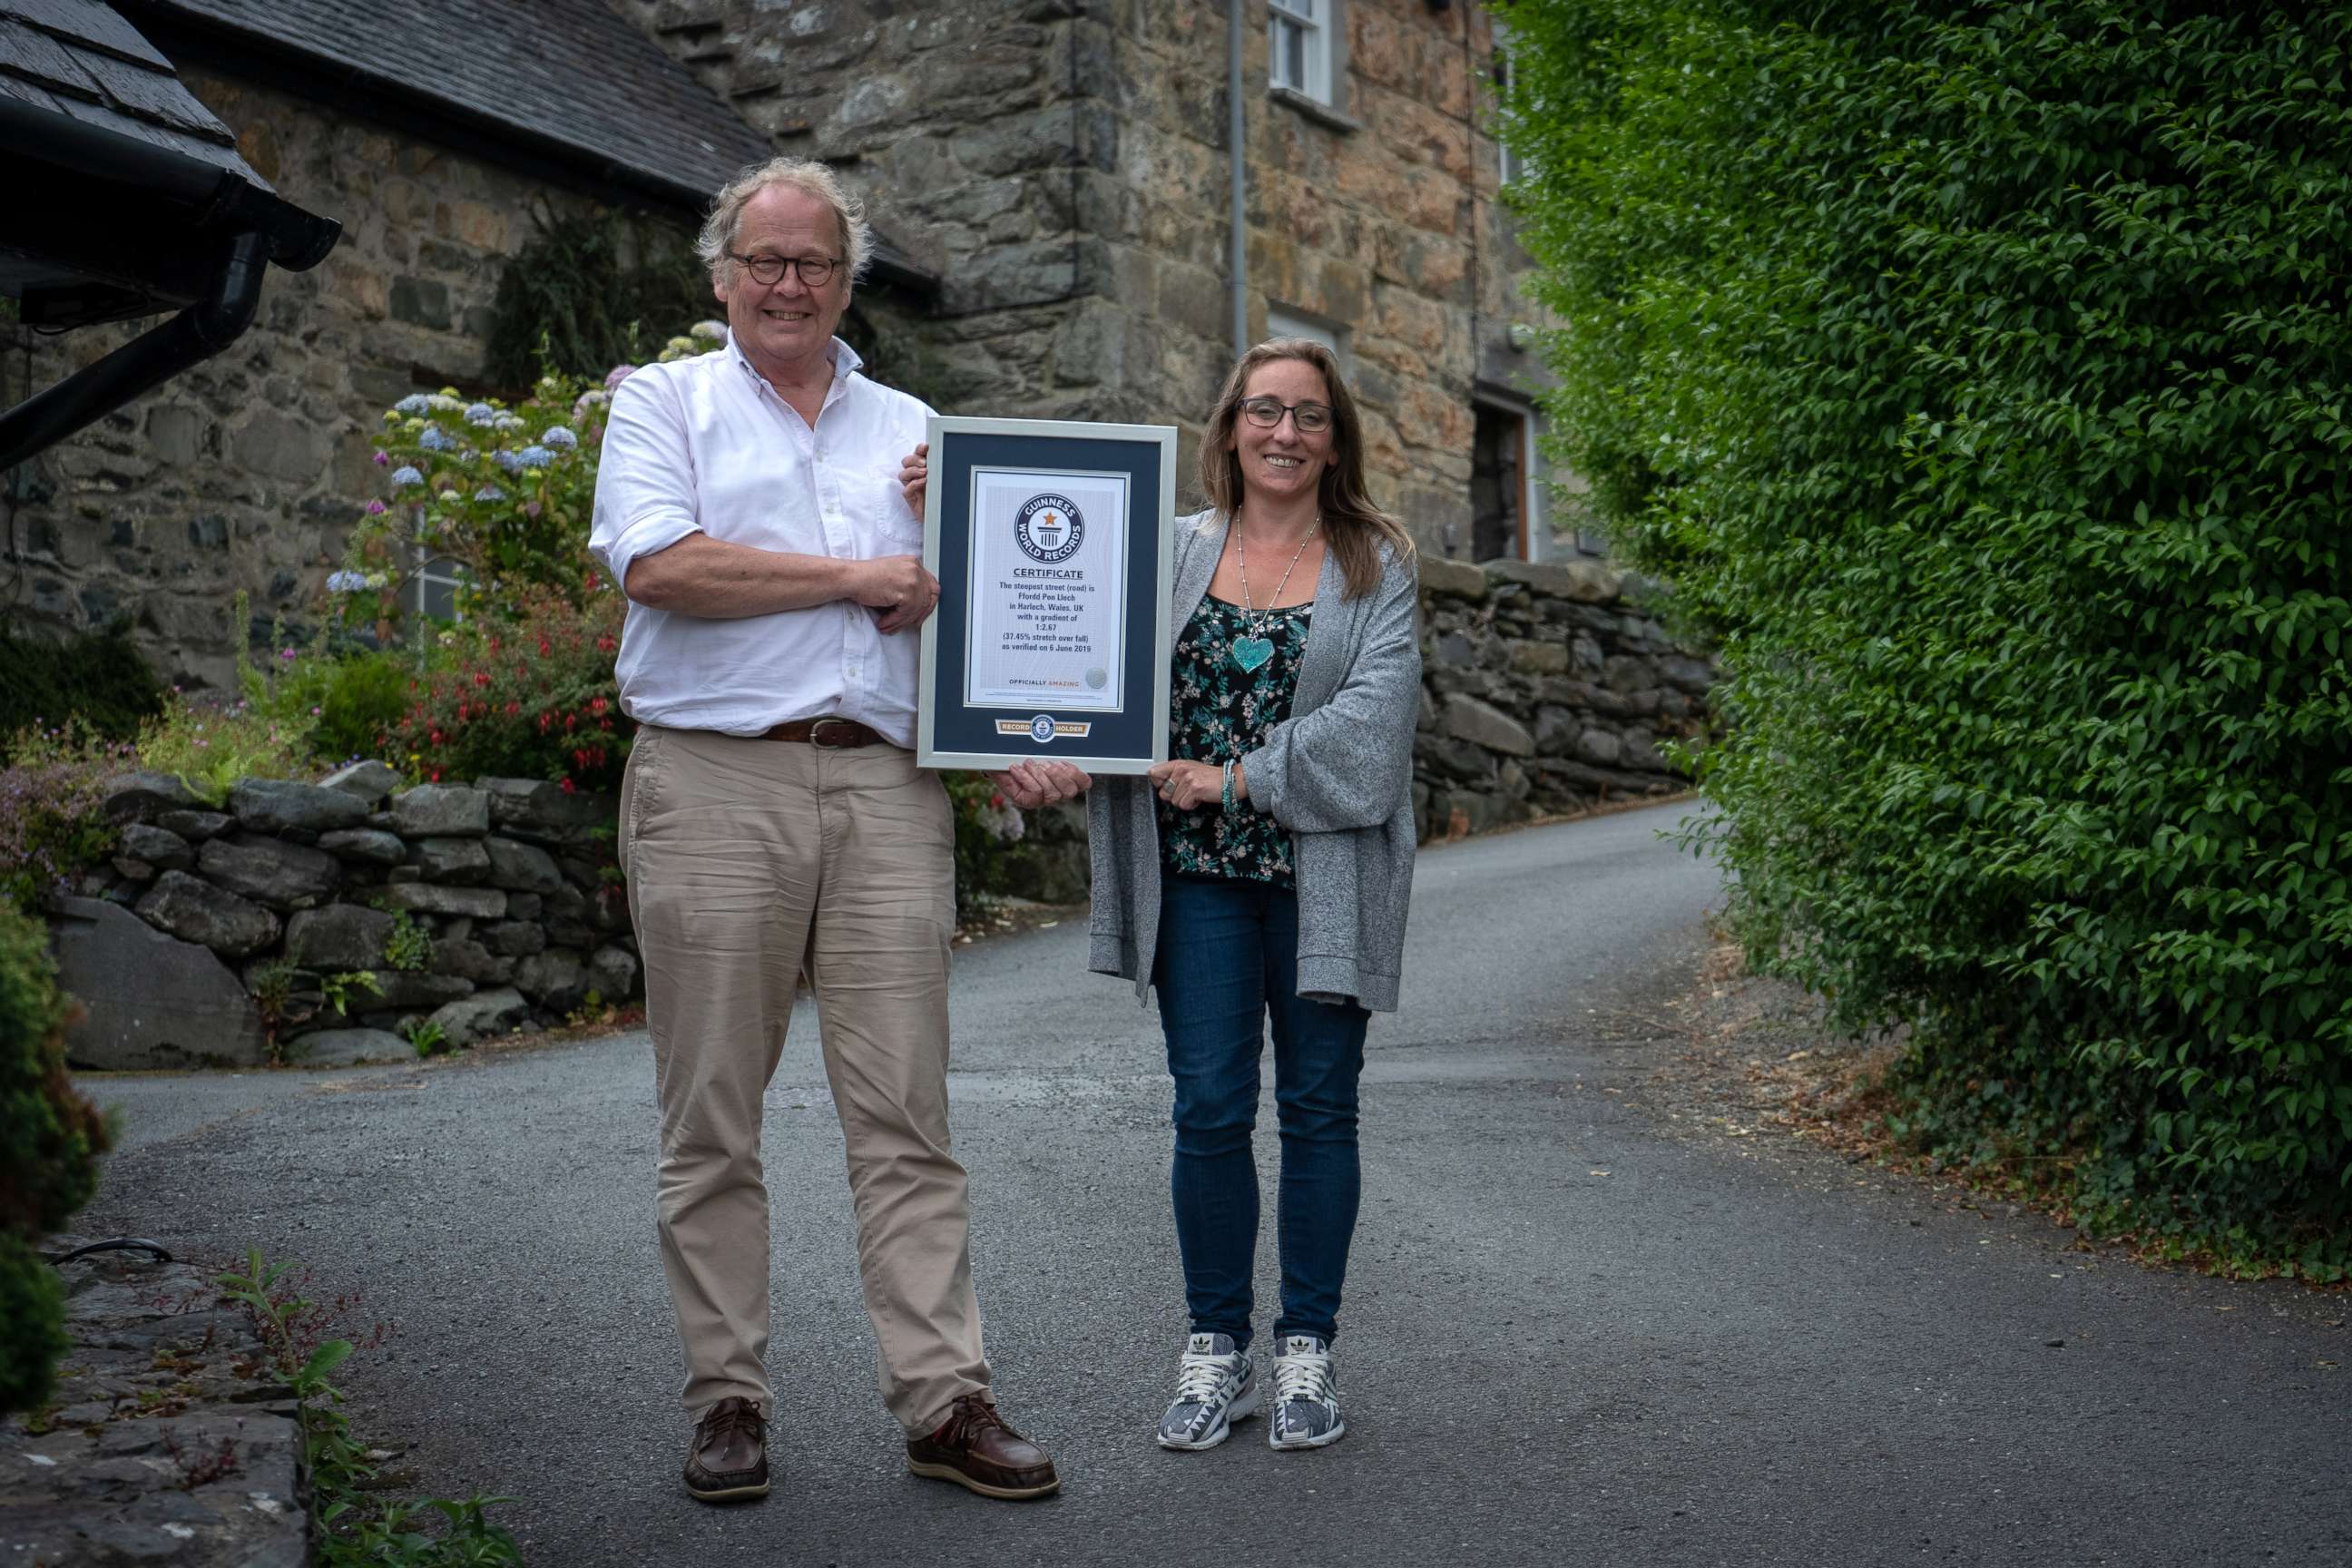 PHOTO: Gwyn Headley and Sarah Badhan, stand on Ffordd Pen Llech with a certificate from Guinness World Records, confirming that the road is the steepest street in the world, in the seaside town of Harlech, North Wales.